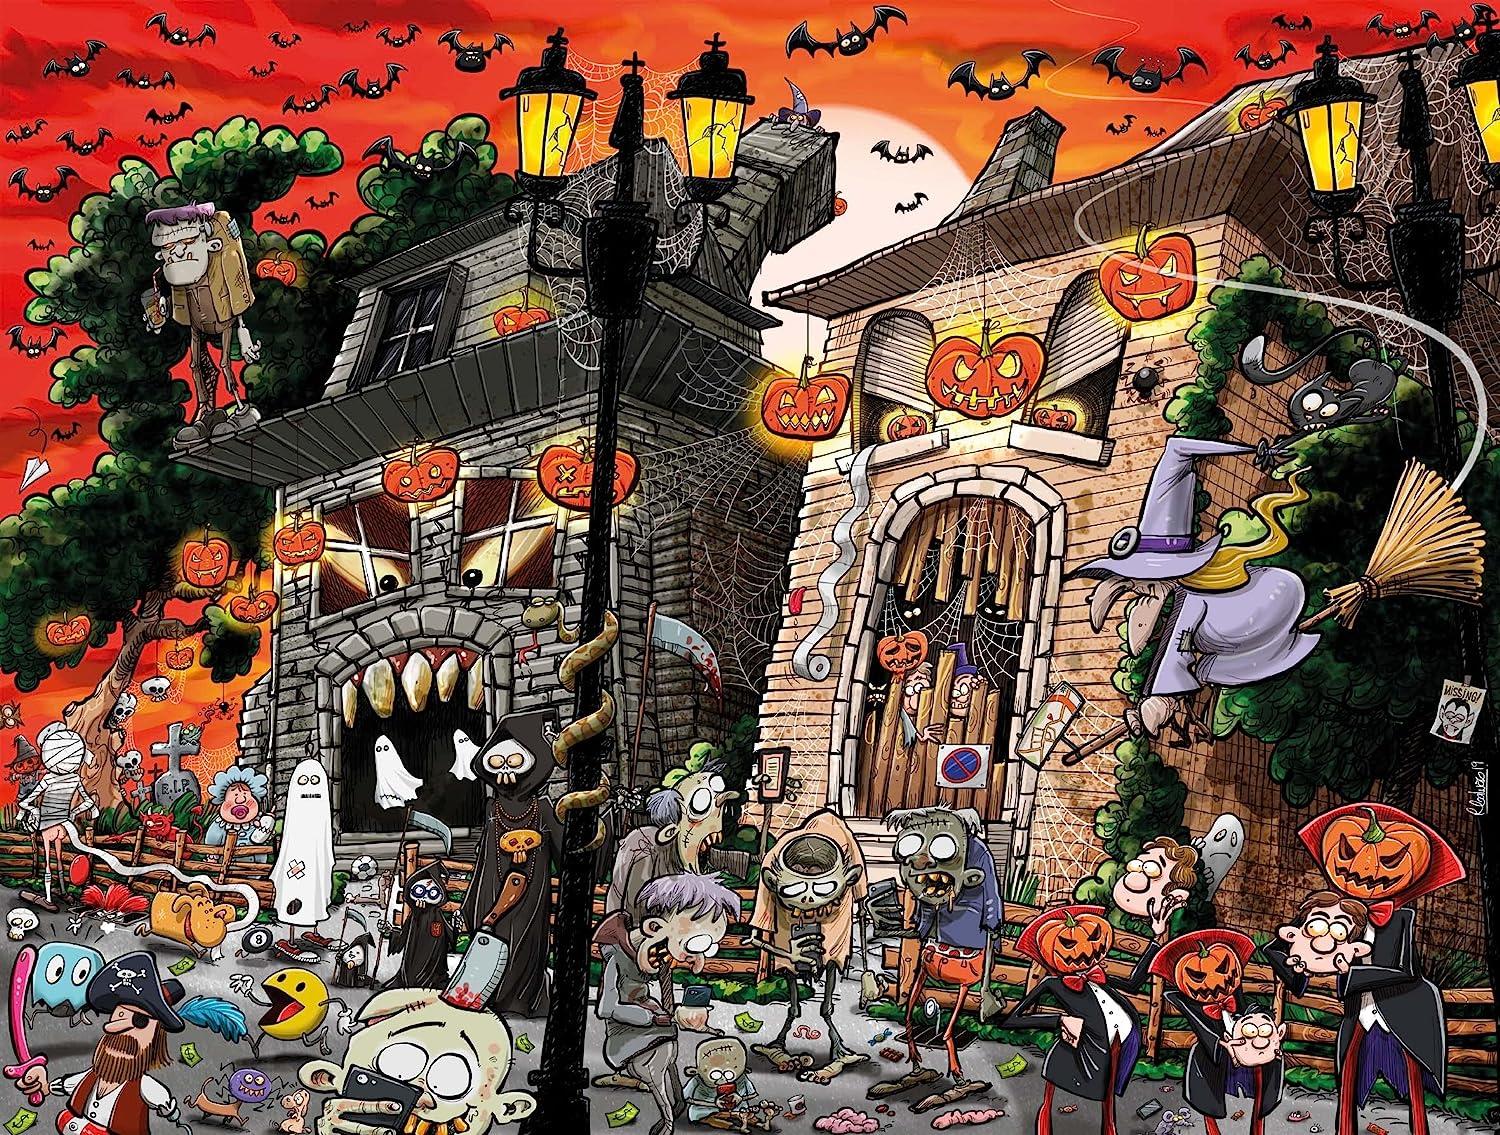 Chaos on Halloween Jigsaw Puzzle (500 Pieces) - Chaos no.17